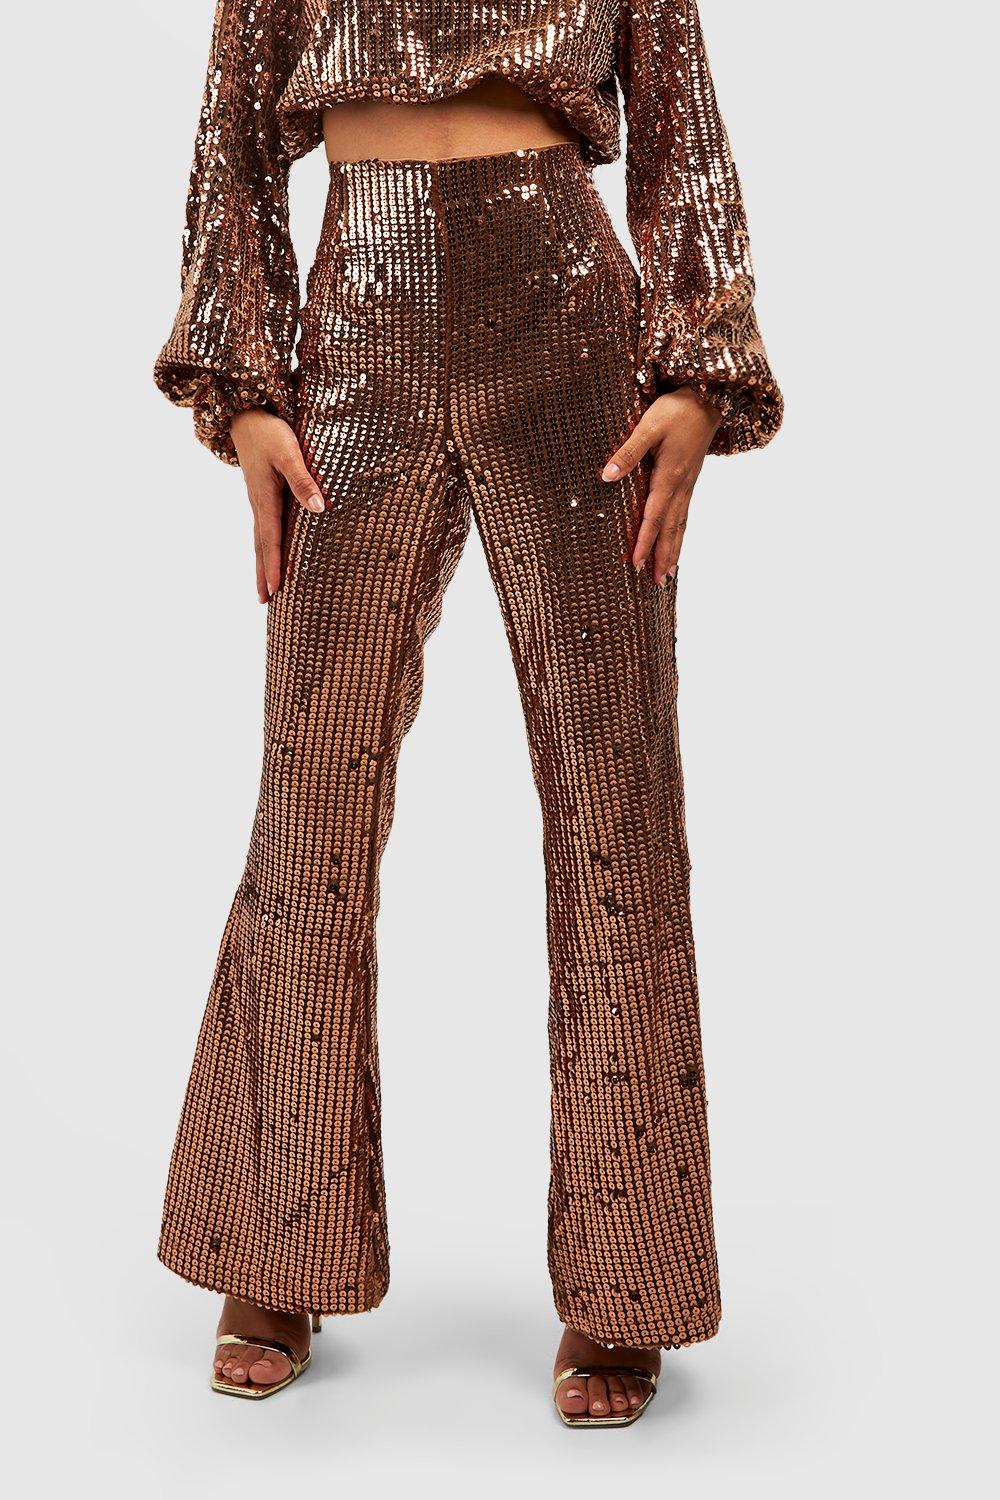 Rose Gold Sequin Flare Pants  Sequin flare pants, Rose gold print, Rose  gold sequin